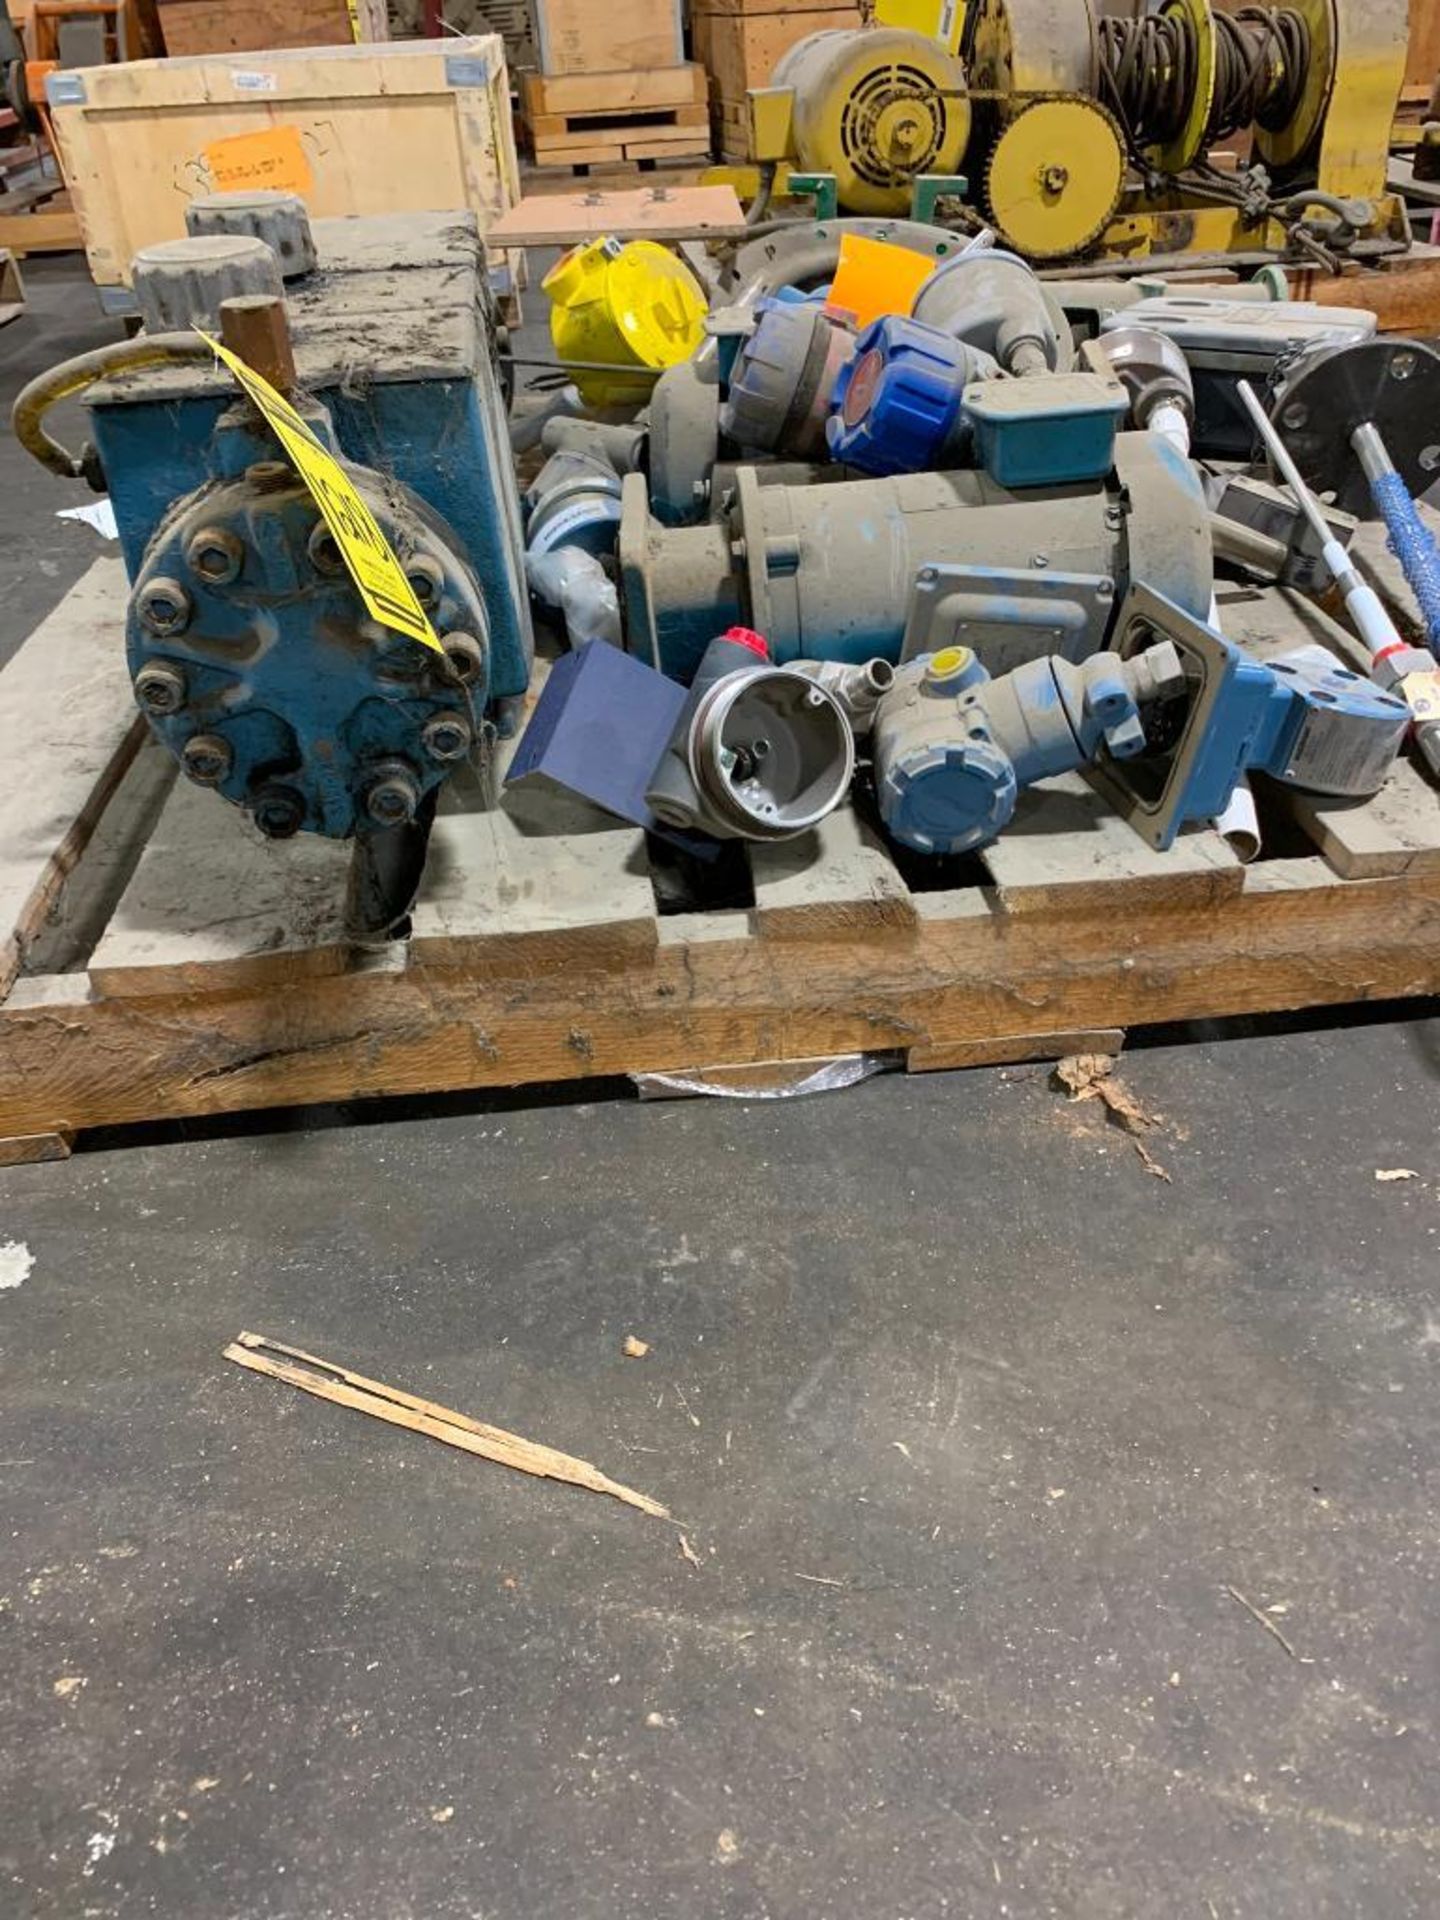 Pallet w/ Assorted Probes, Covers, Assorted Machine Parts